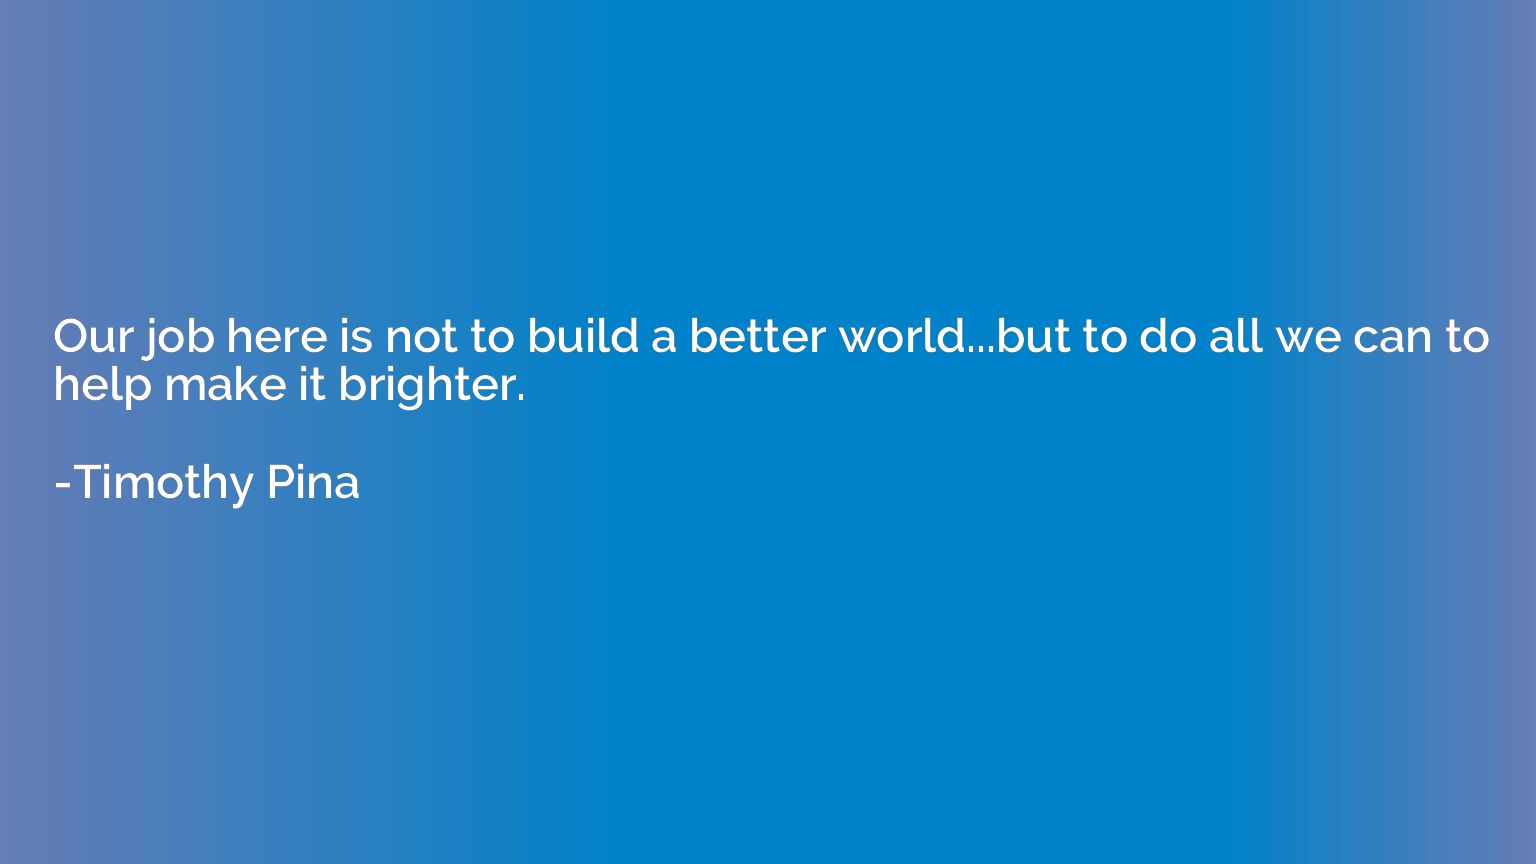 Our job here is not to build a better world...but to do all 